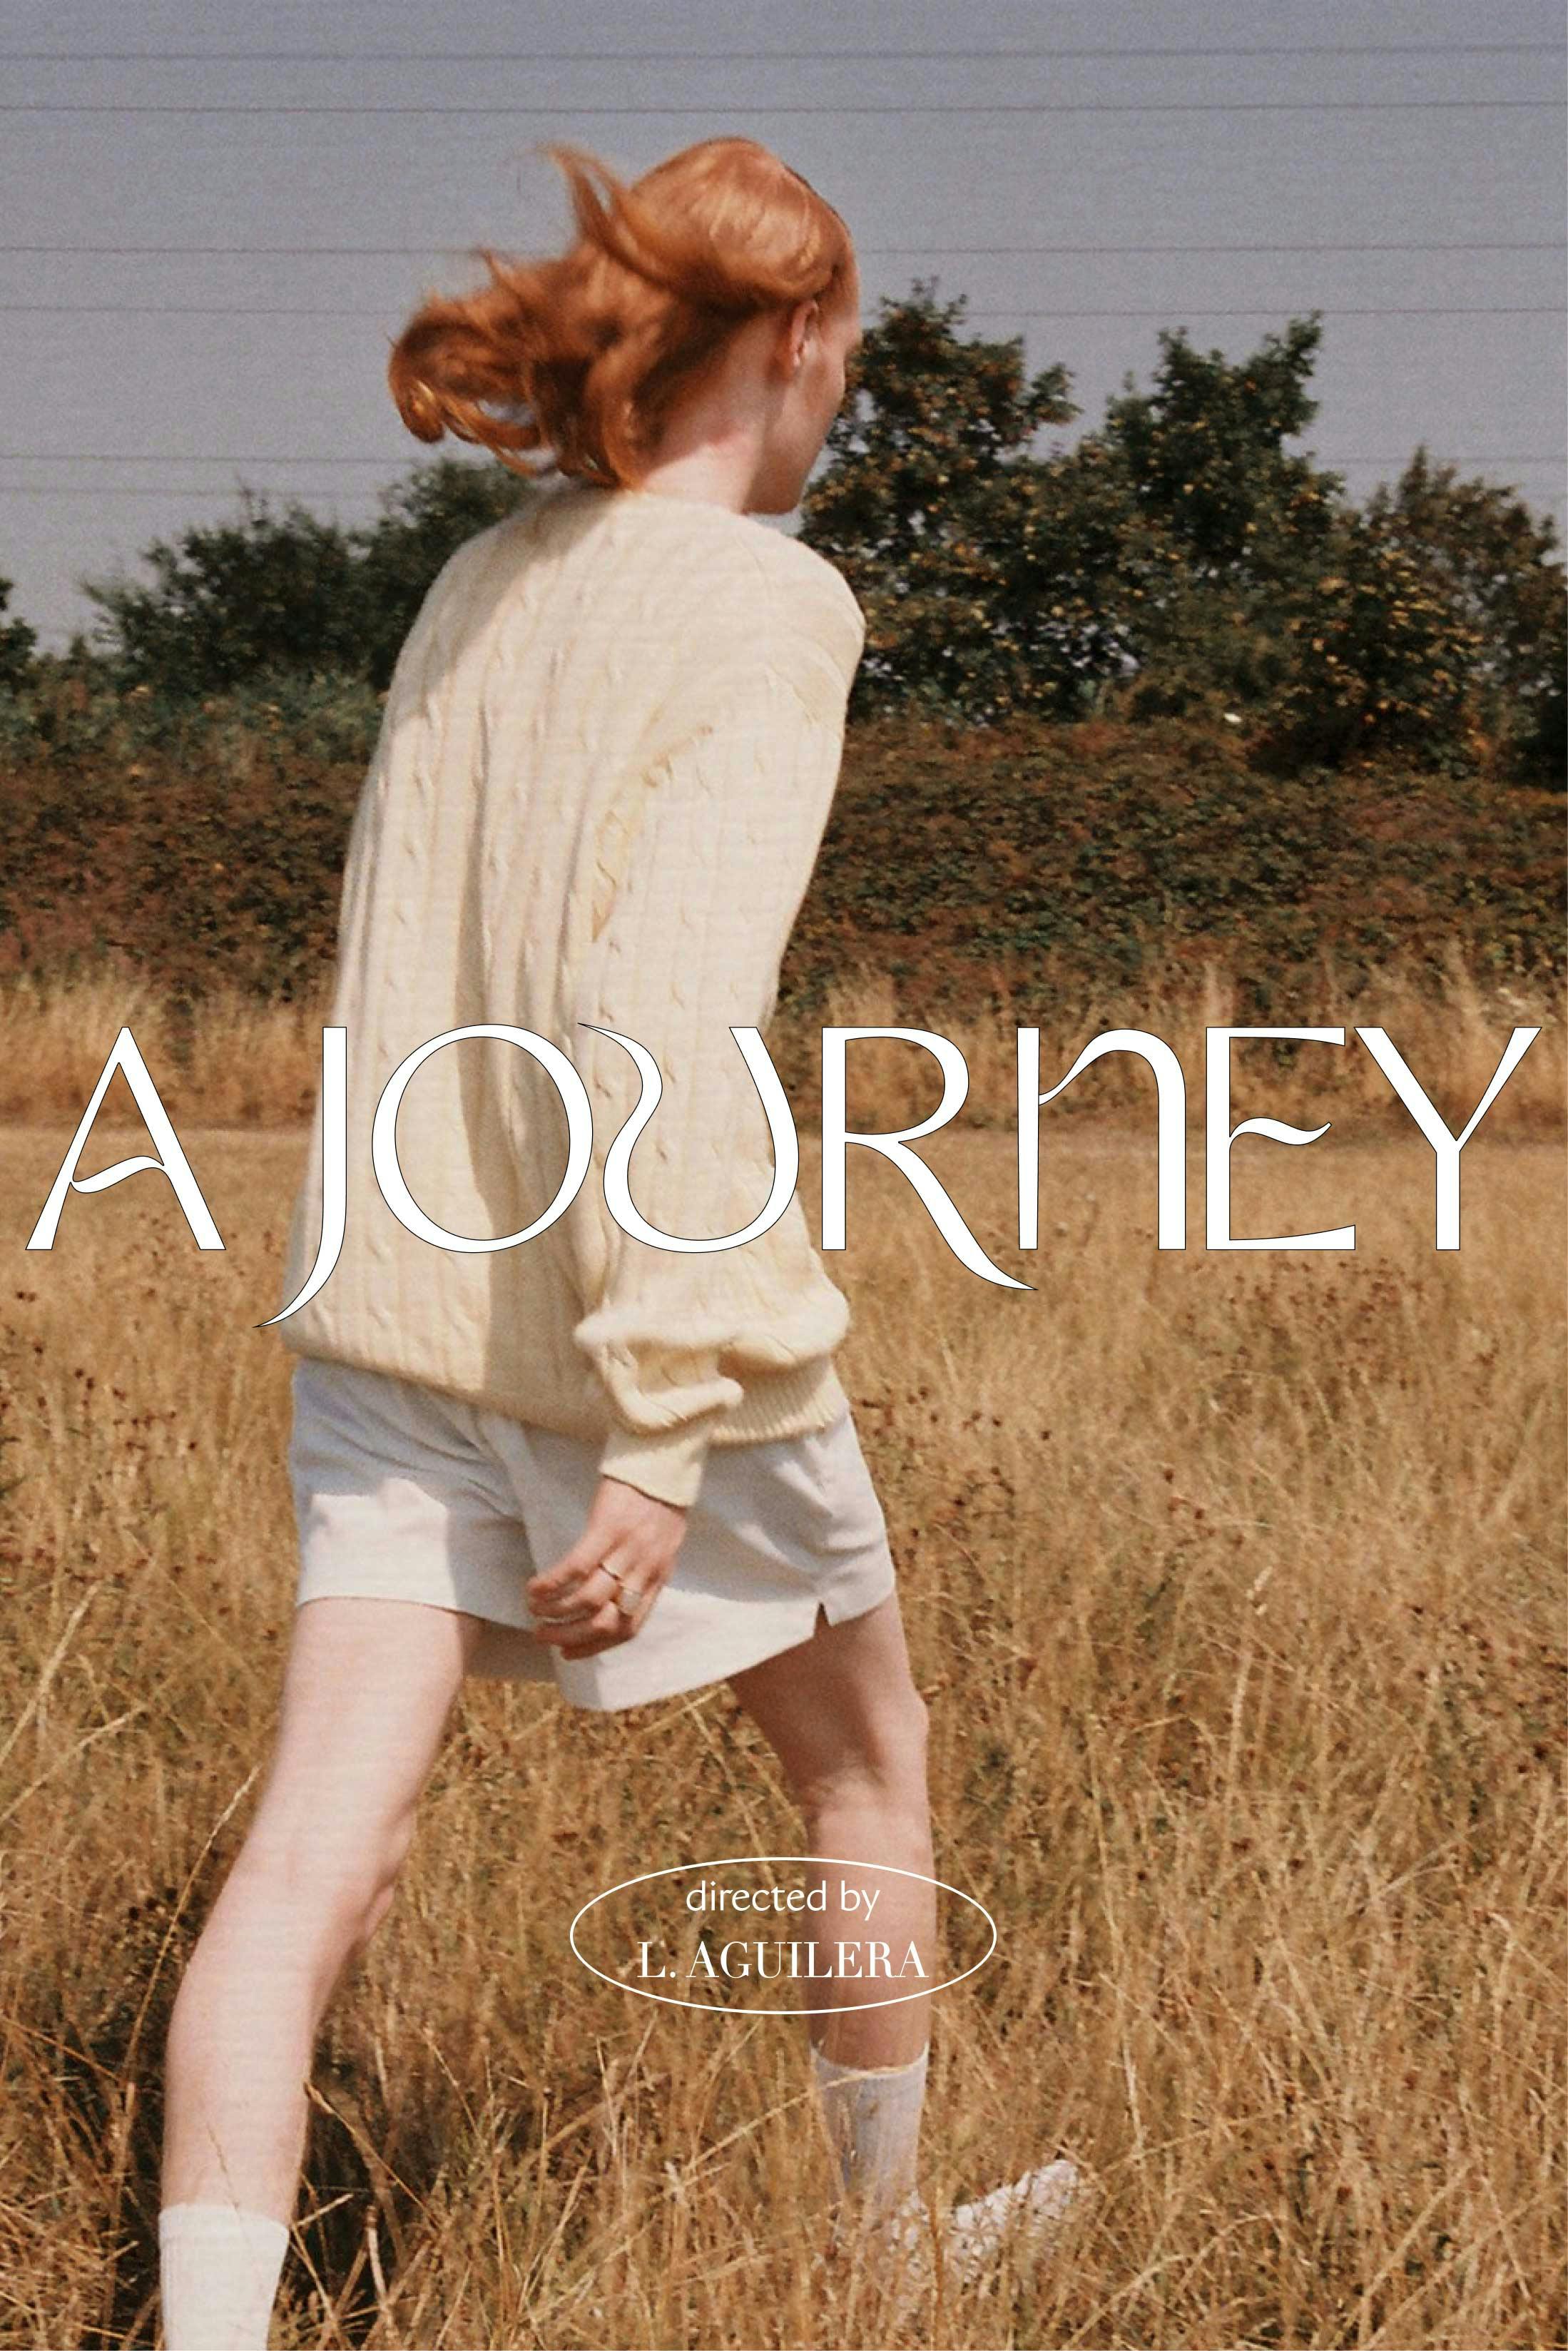 A journey